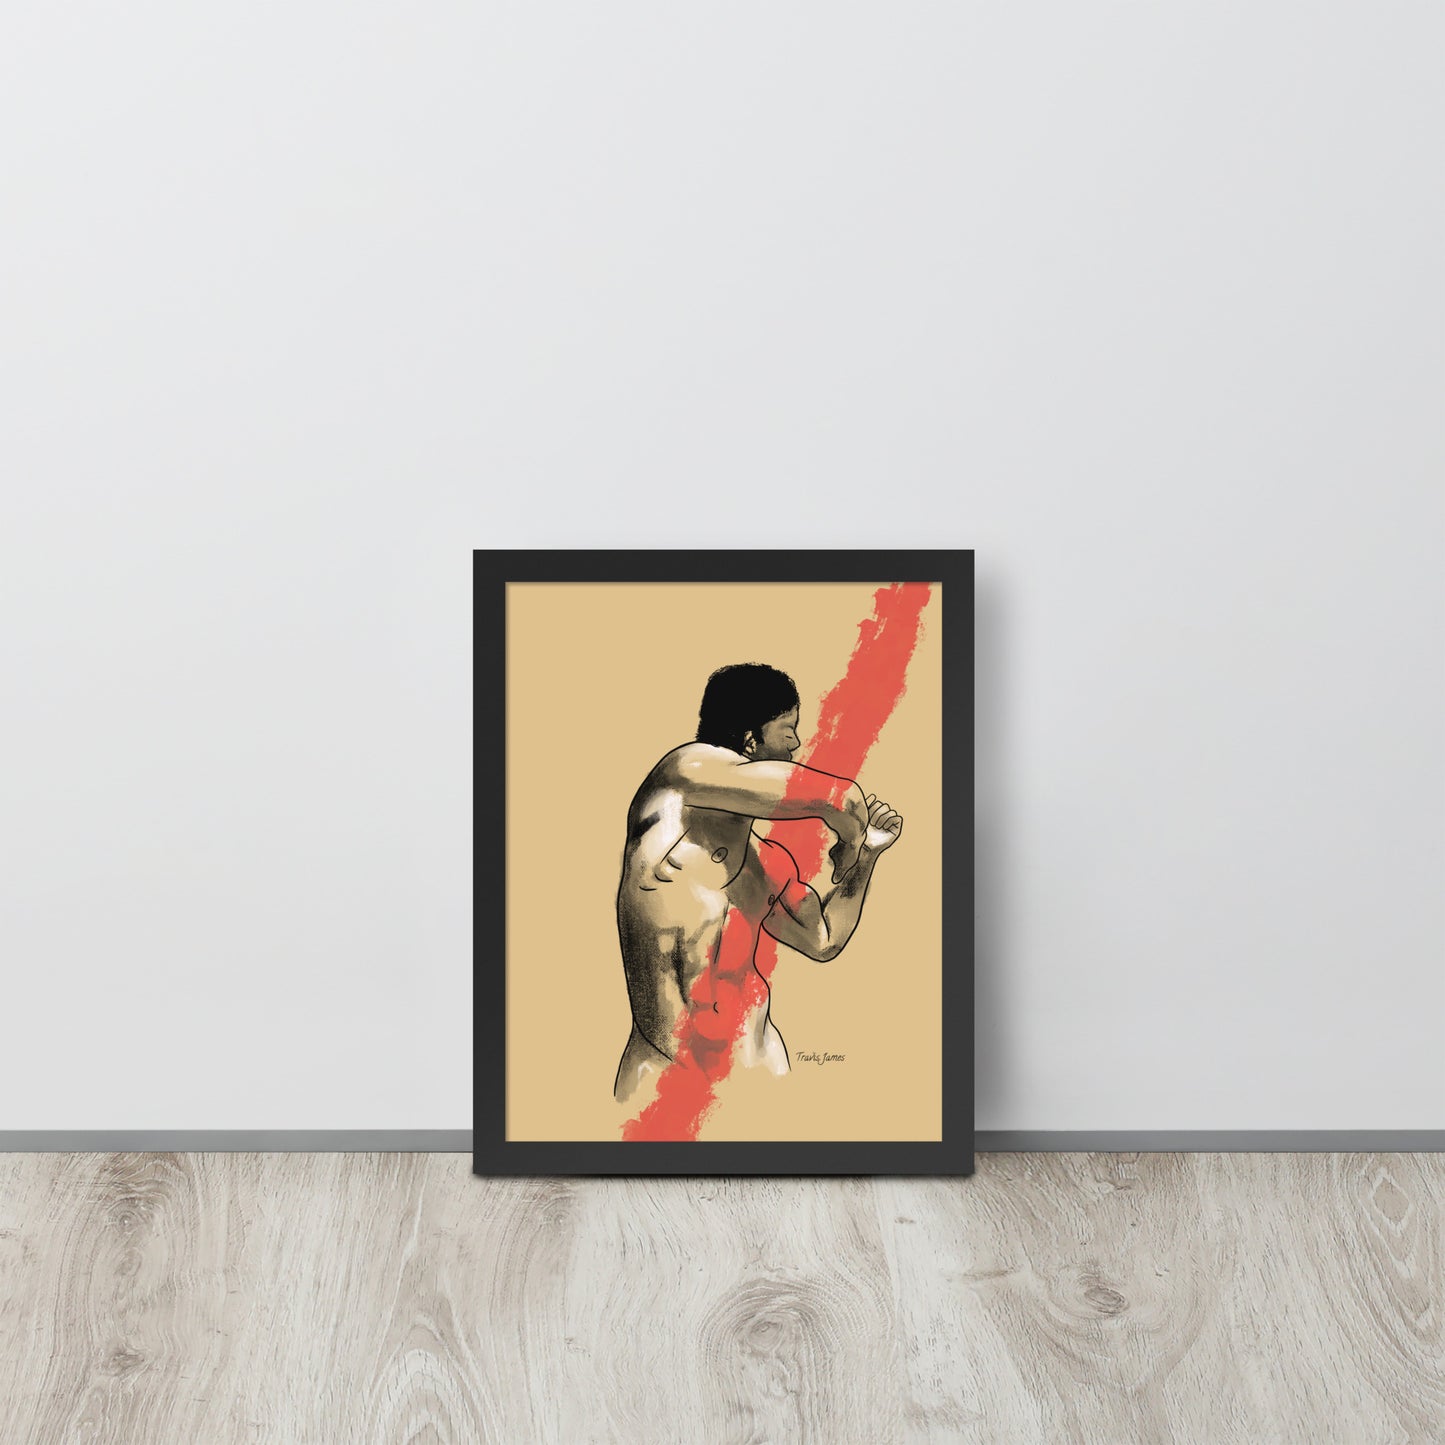 Art Print "Blinded no more"